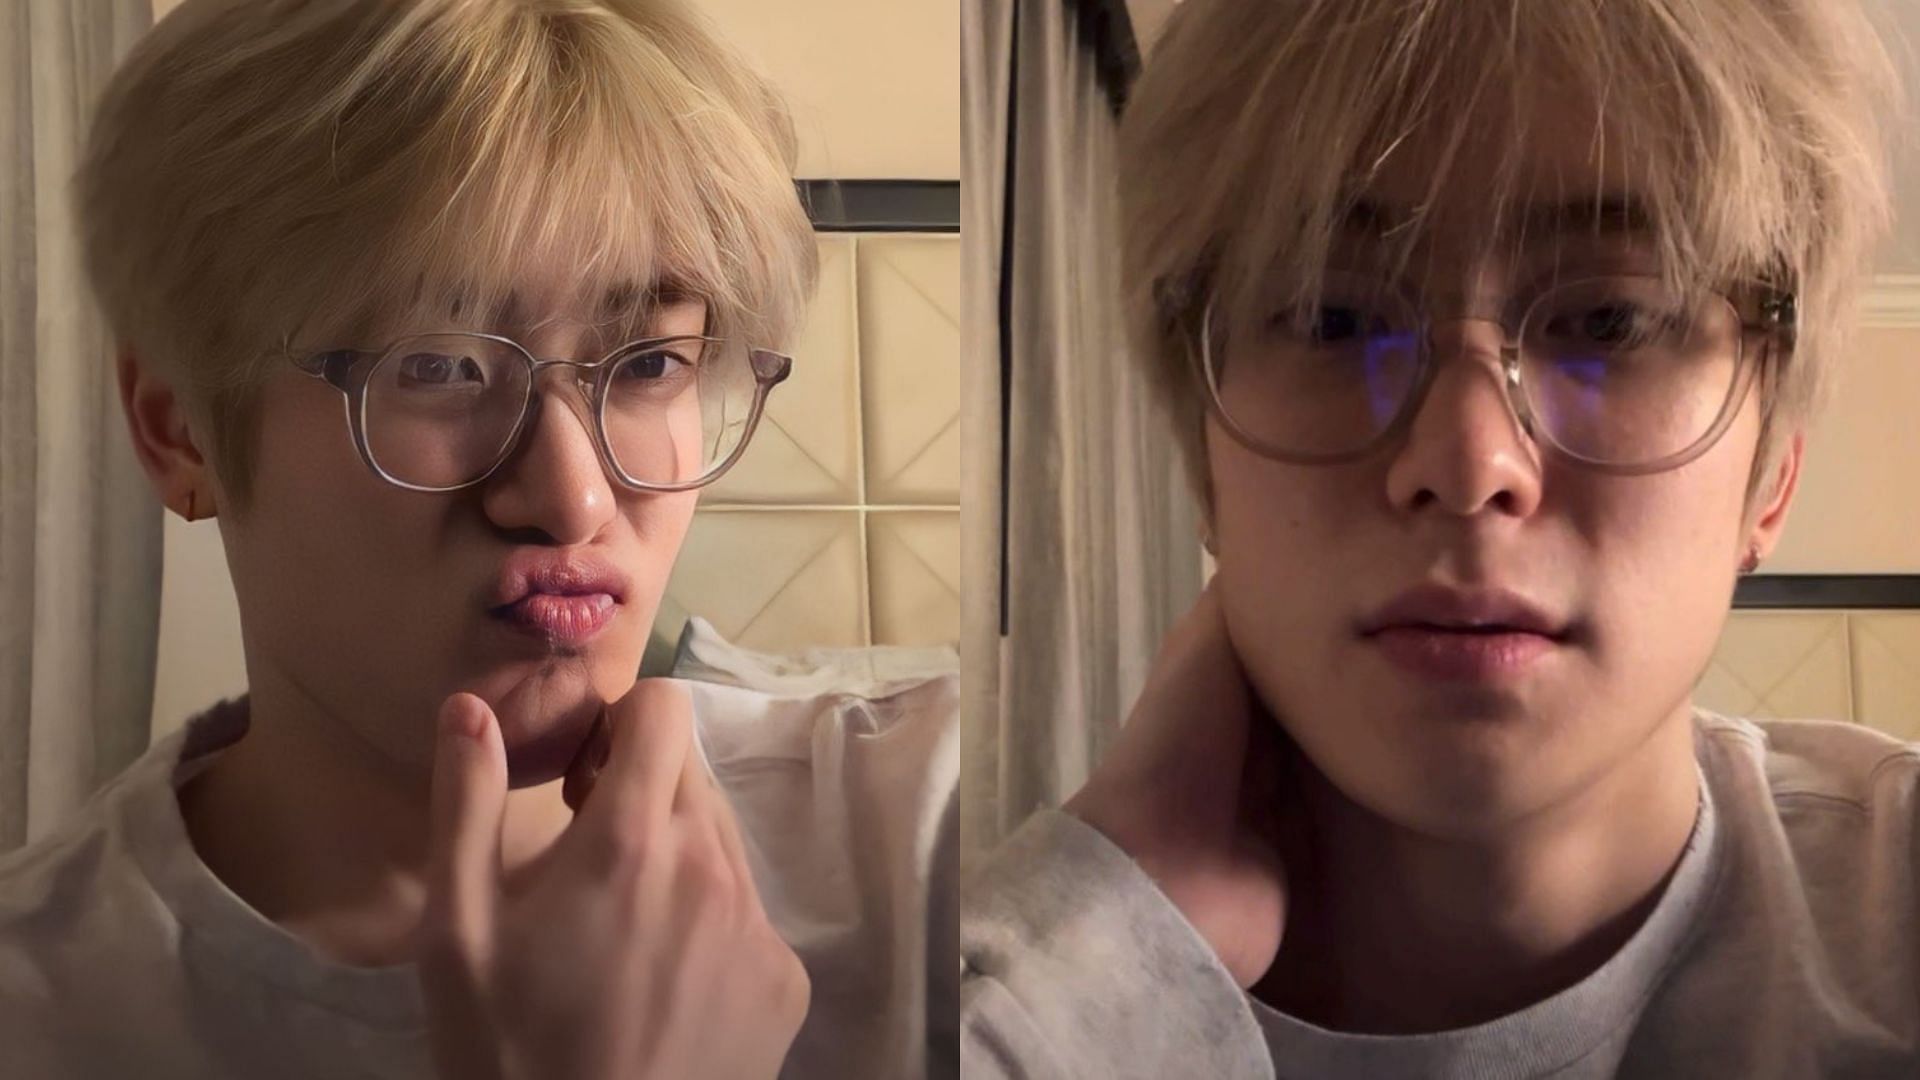 NCT 127 Jaehyun goes viral for his blonde hair and glasses (Image via Twitter/@clingyqueen)